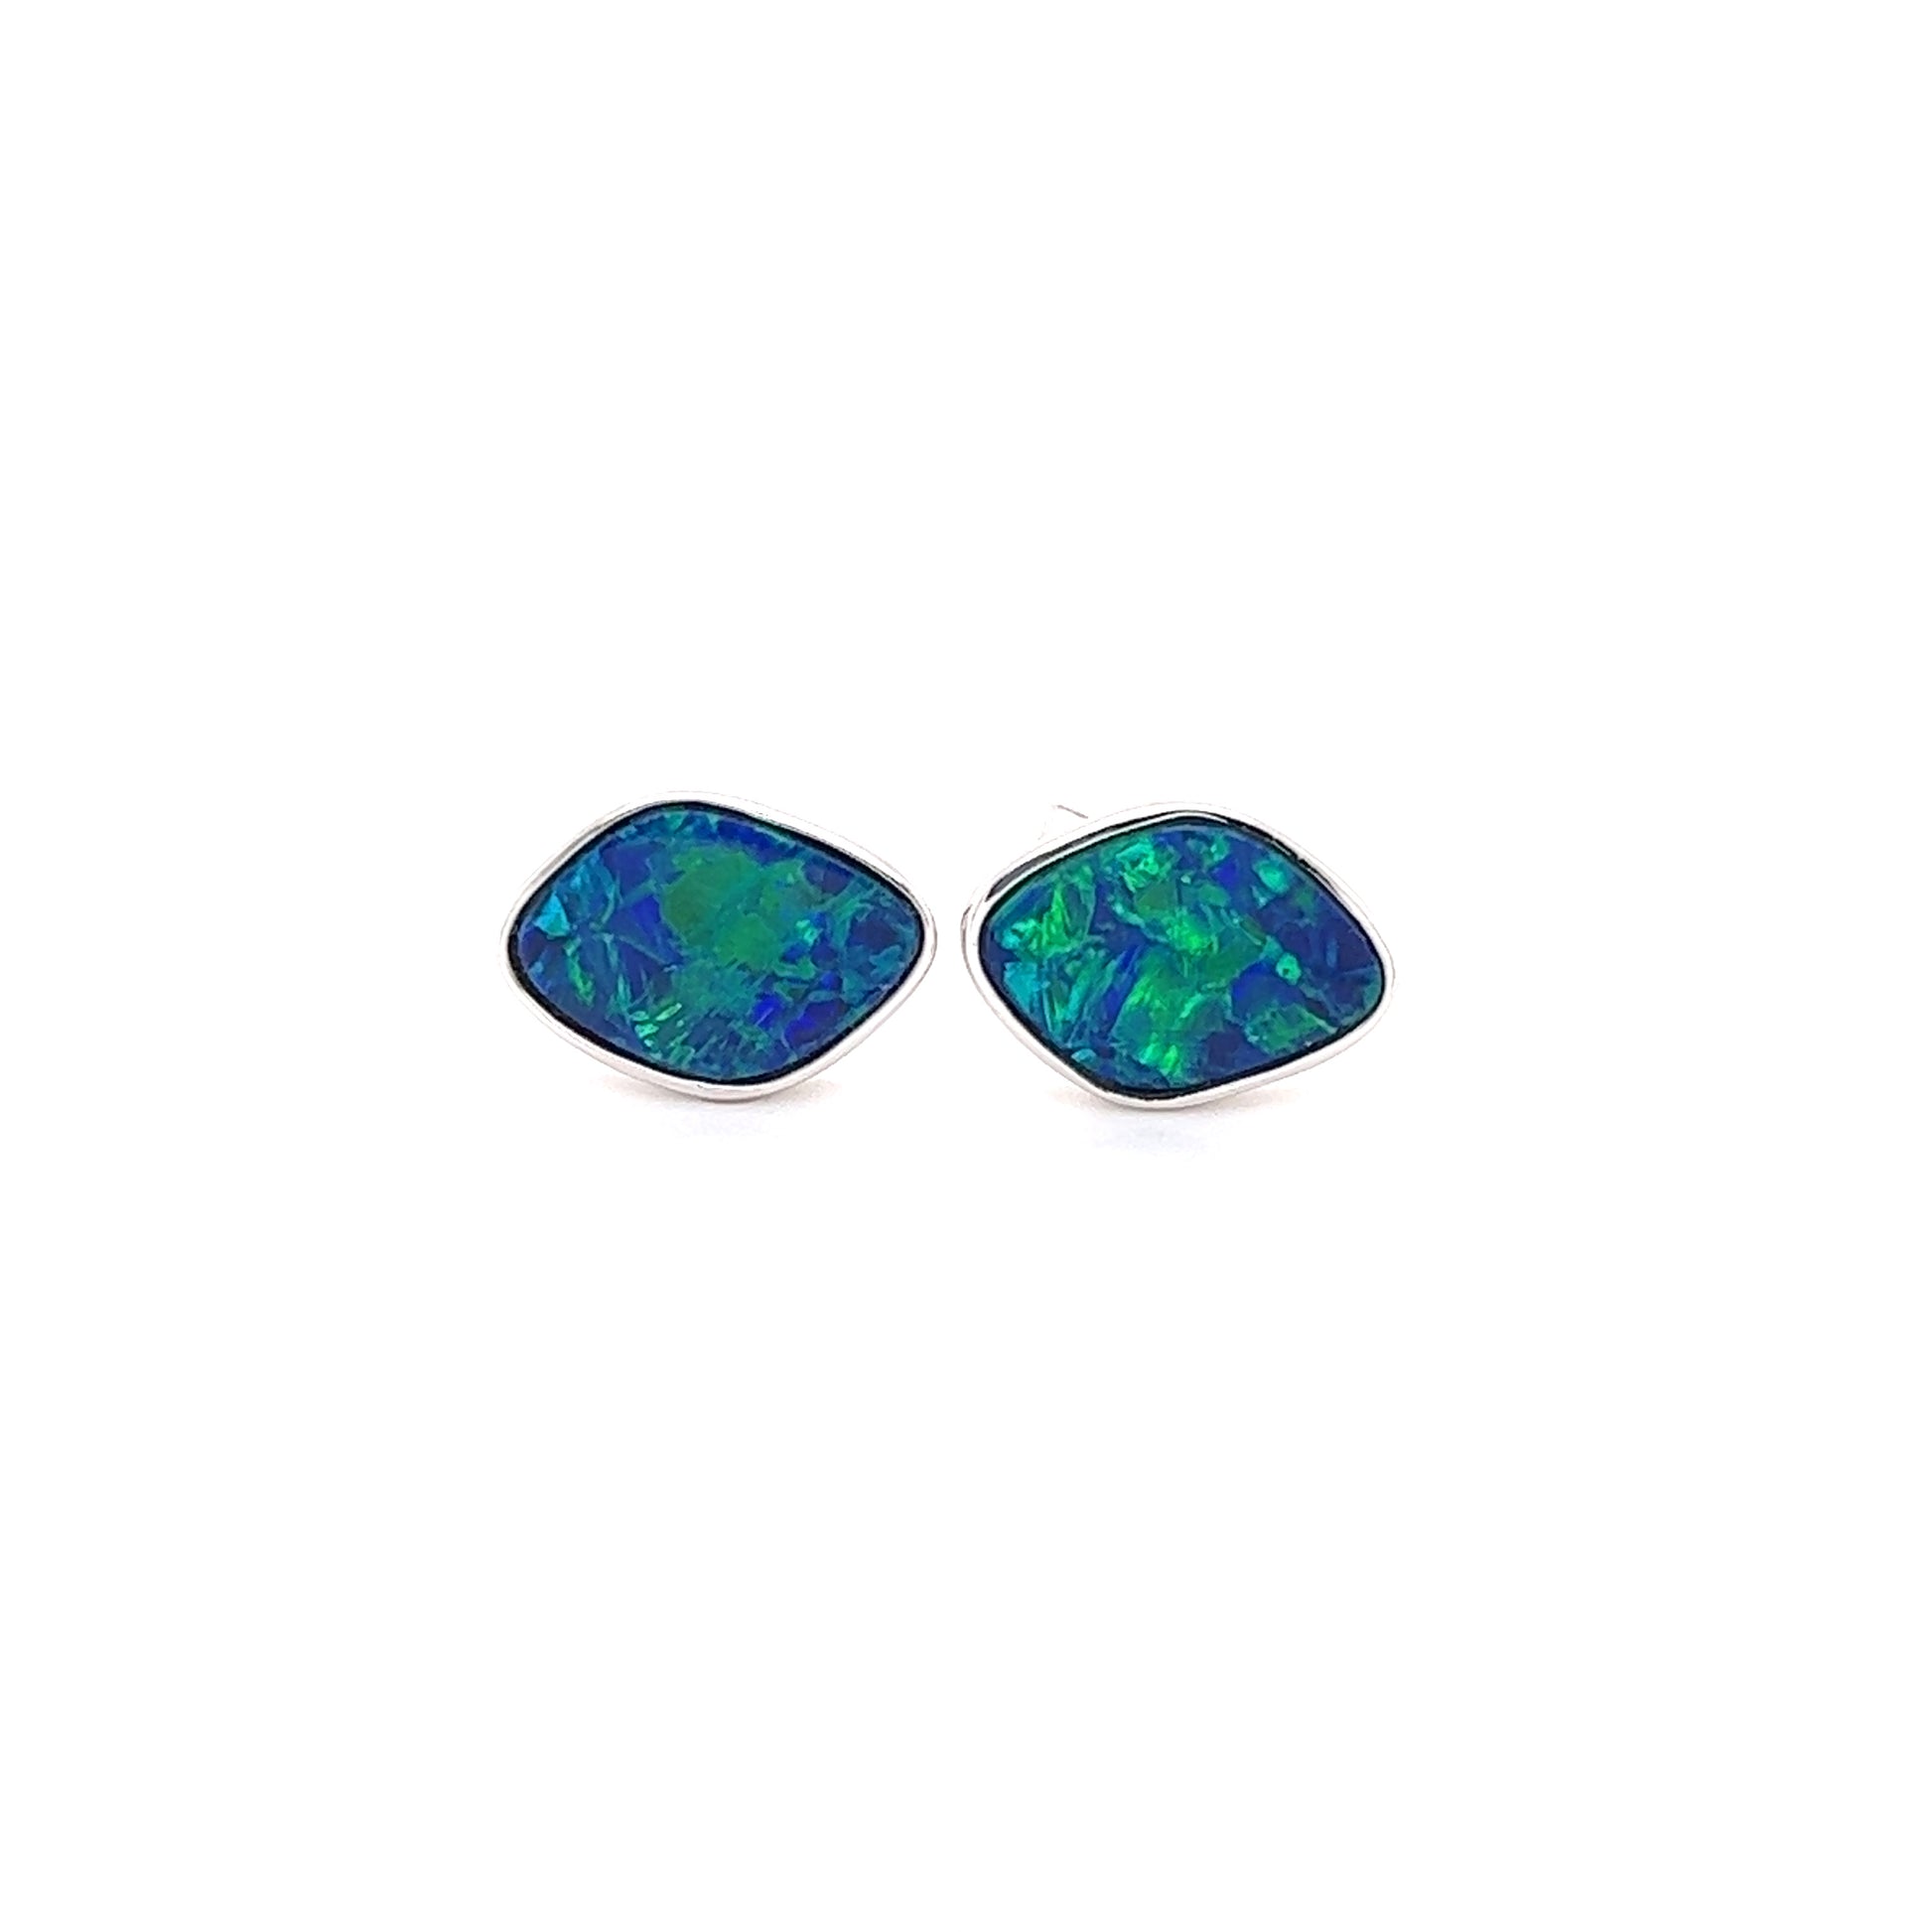 Black Opal Stud Earrings with 2.79ctw of Opal in 14K White Gold Front View